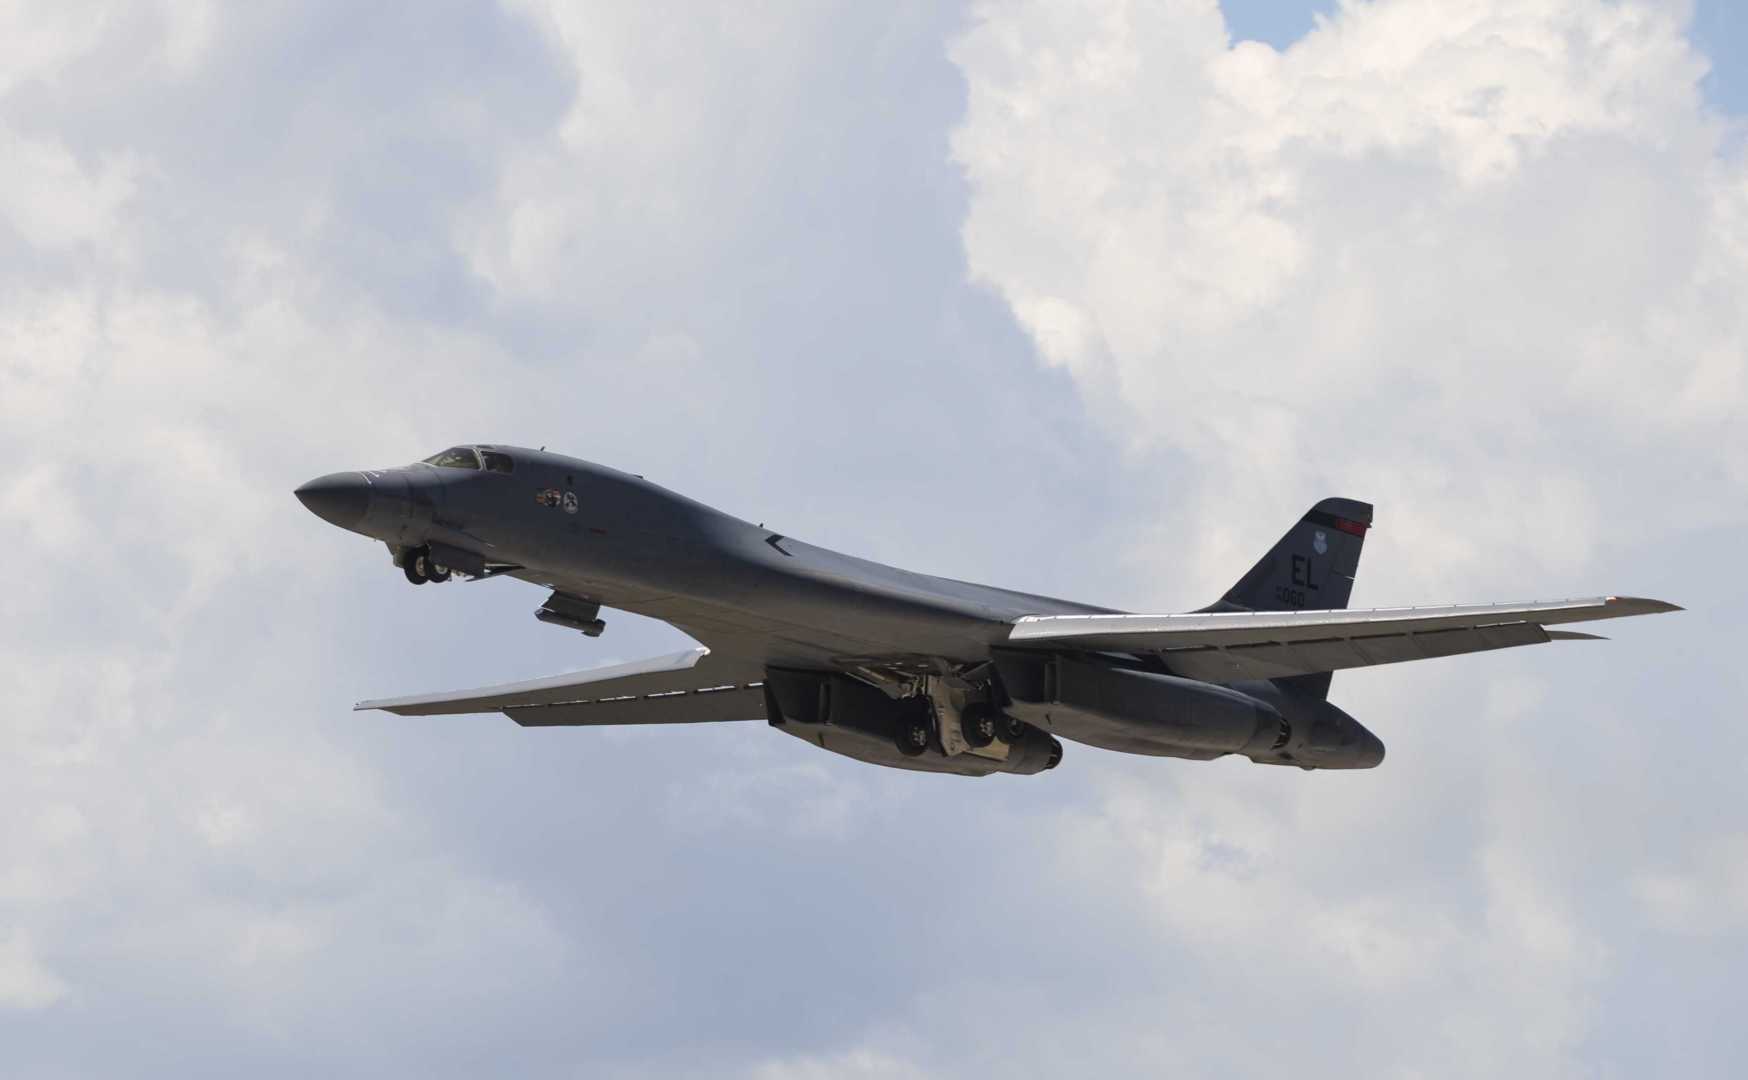 A B-1 bomber soars through the sky during suppression of enemy air defenses training at Ellsworth Air Force Base, S.D., July 15, 2016. During SEAD missions, bombers are used offensively to destroy targets while EA-18G Growlers work as a supporting aircraft to deny, degrade or delay the enemies’ ability to acquire and engage friendly air forces and also give bombers access to those targeted areas. (U.S. Air Force photo by Airman 1st Class Sadie Colbert/Released)